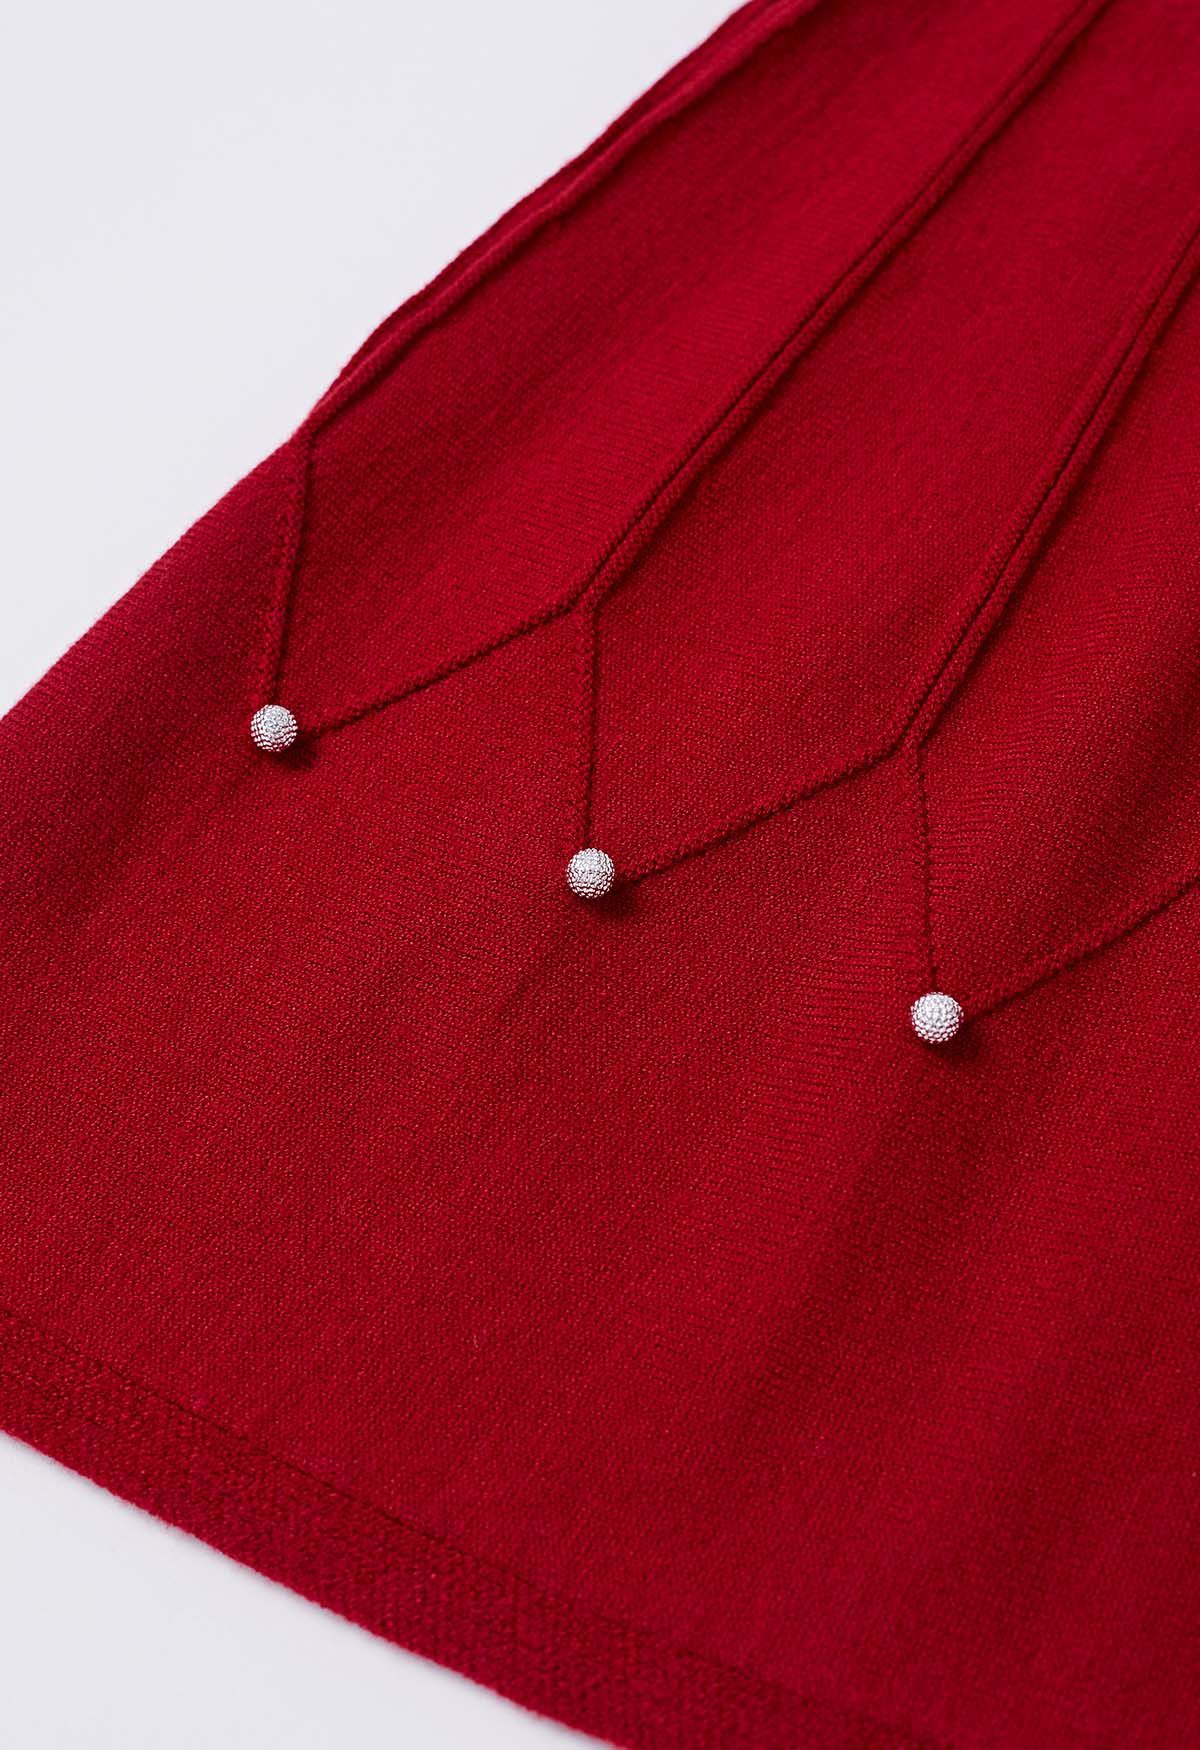 Silver Bead Embellished Seam Knit Skirt in Red